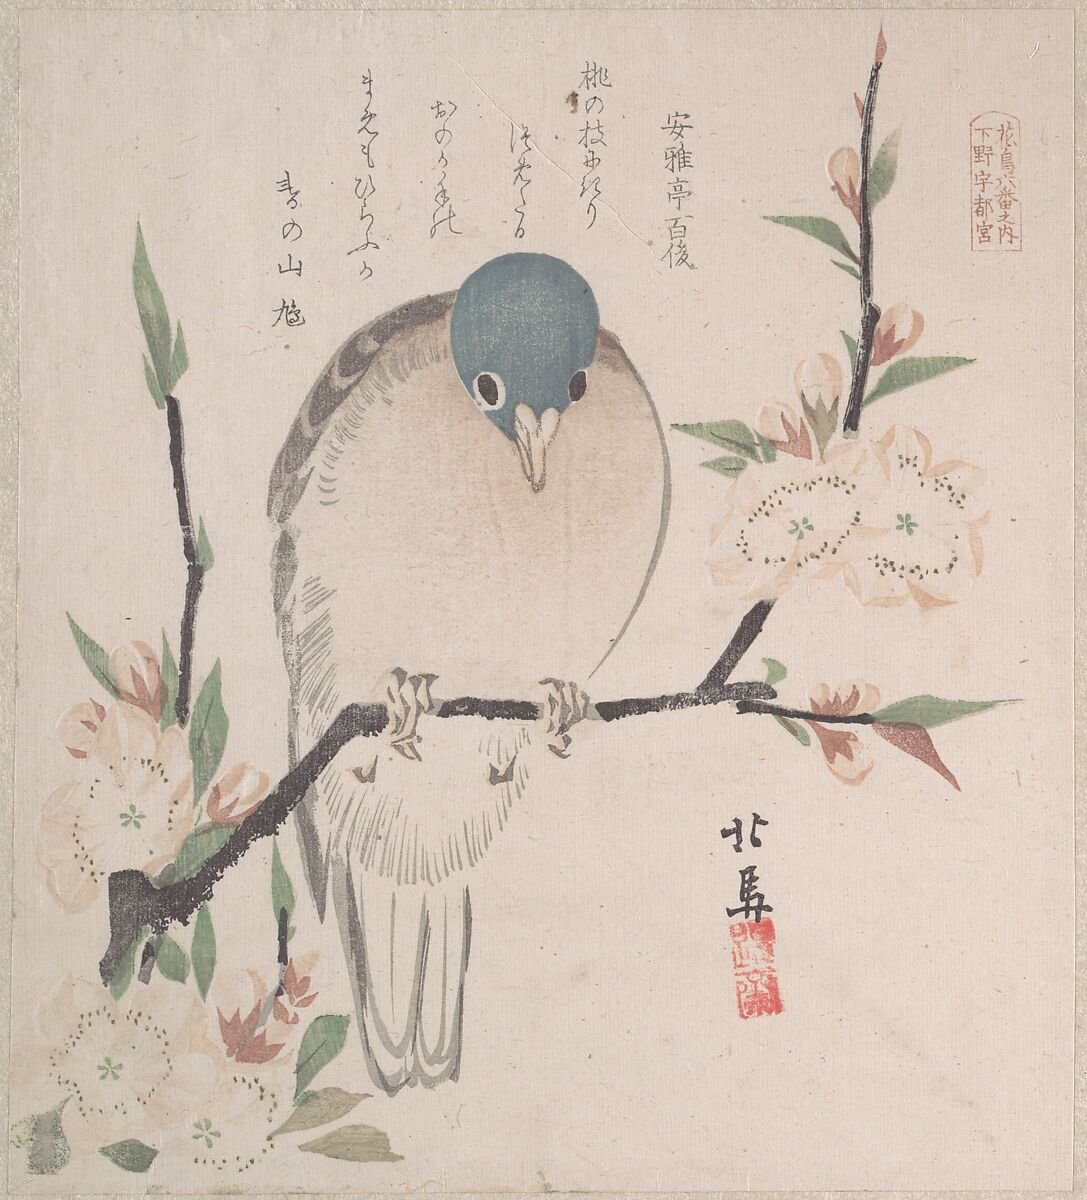 Spring Rain Collection (Harusame shū), vol. 3: Mountain Dove and Peach Flowers, Teisai Hokuba (Japanese, 1771–1844), Privately published woodblock prints (surimono) mounted in an album; ink and color on paper, Japan 